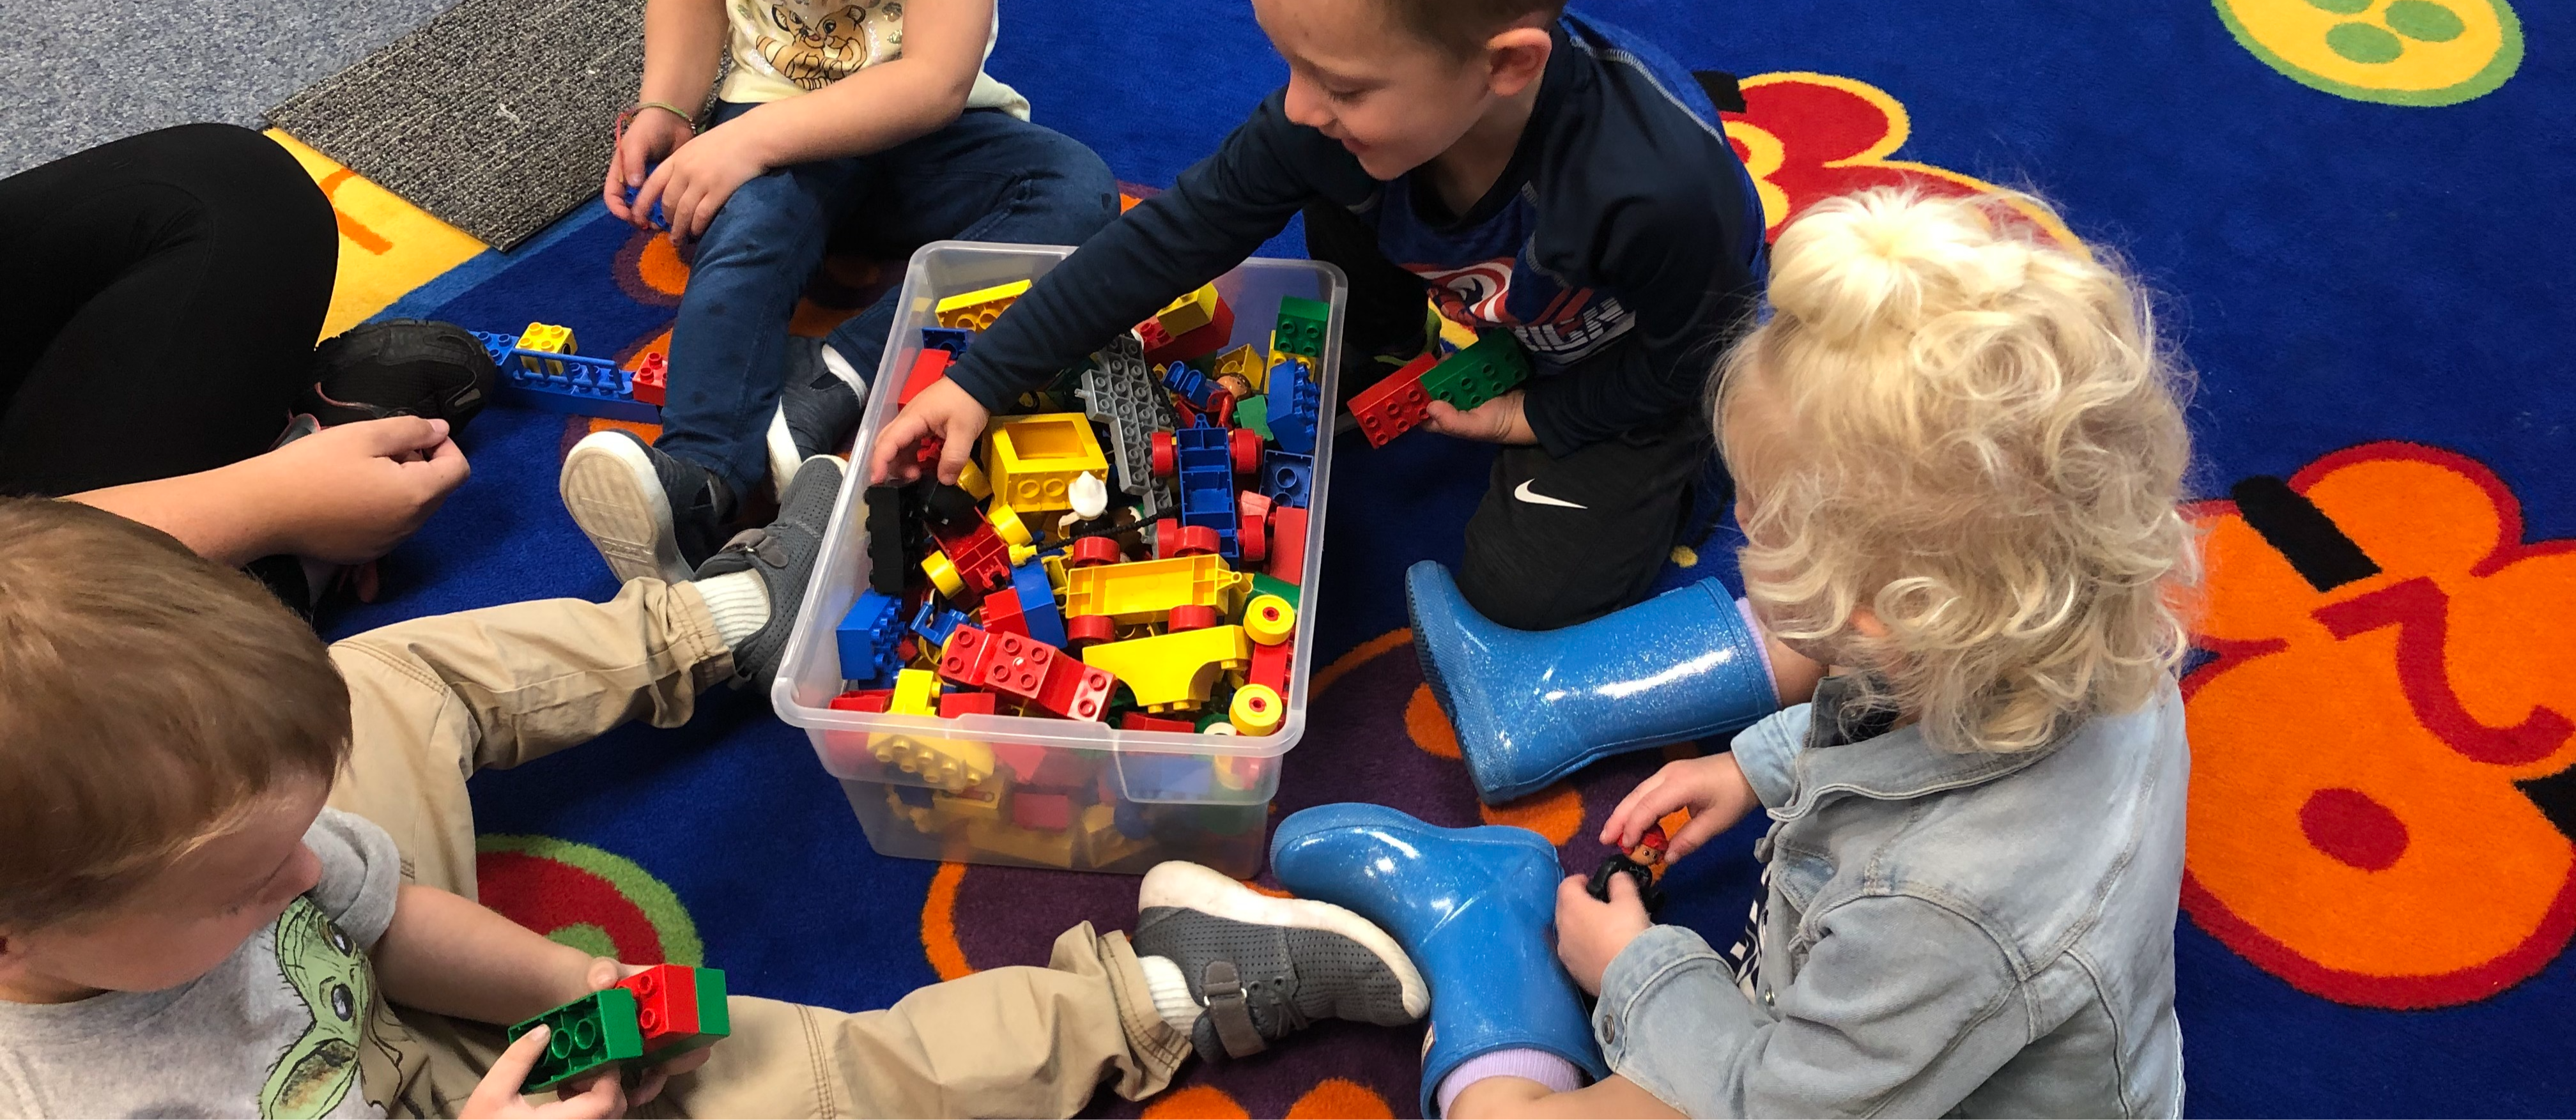 Young children playing with brightly colored blocks